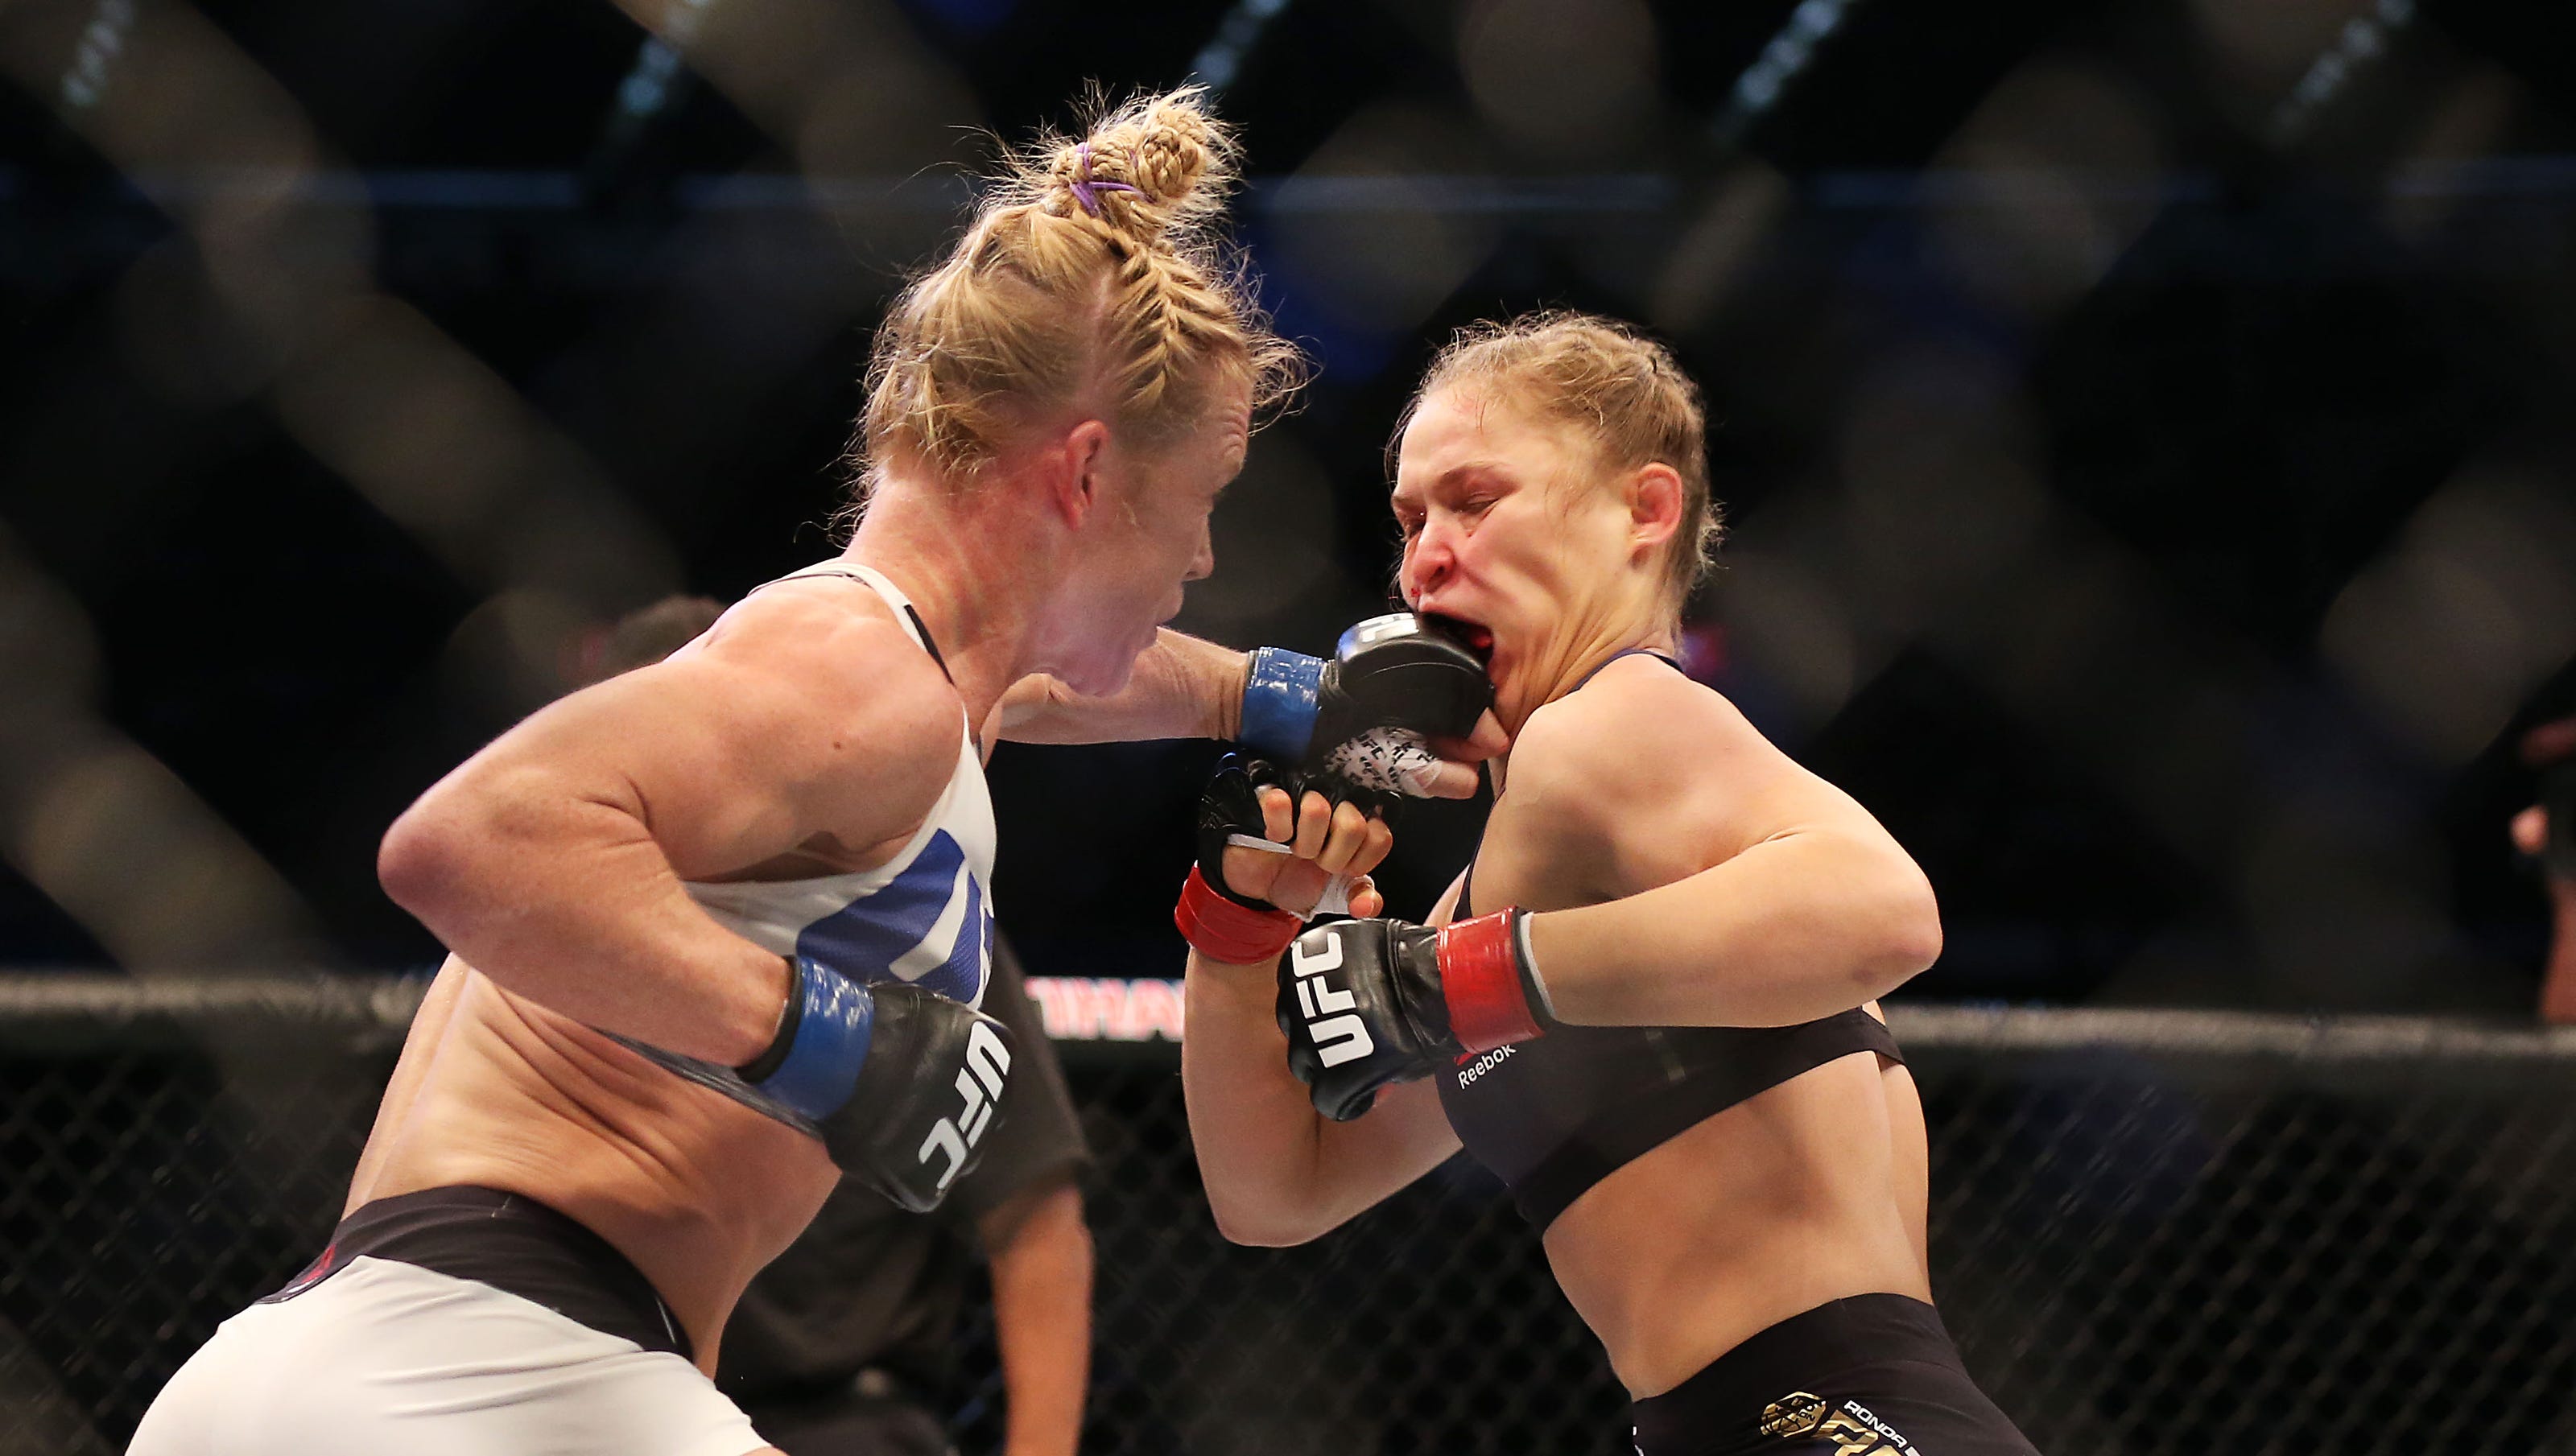 Ronda Rousey Ko D Reaction To Holly Holm Ufc 193 Upset